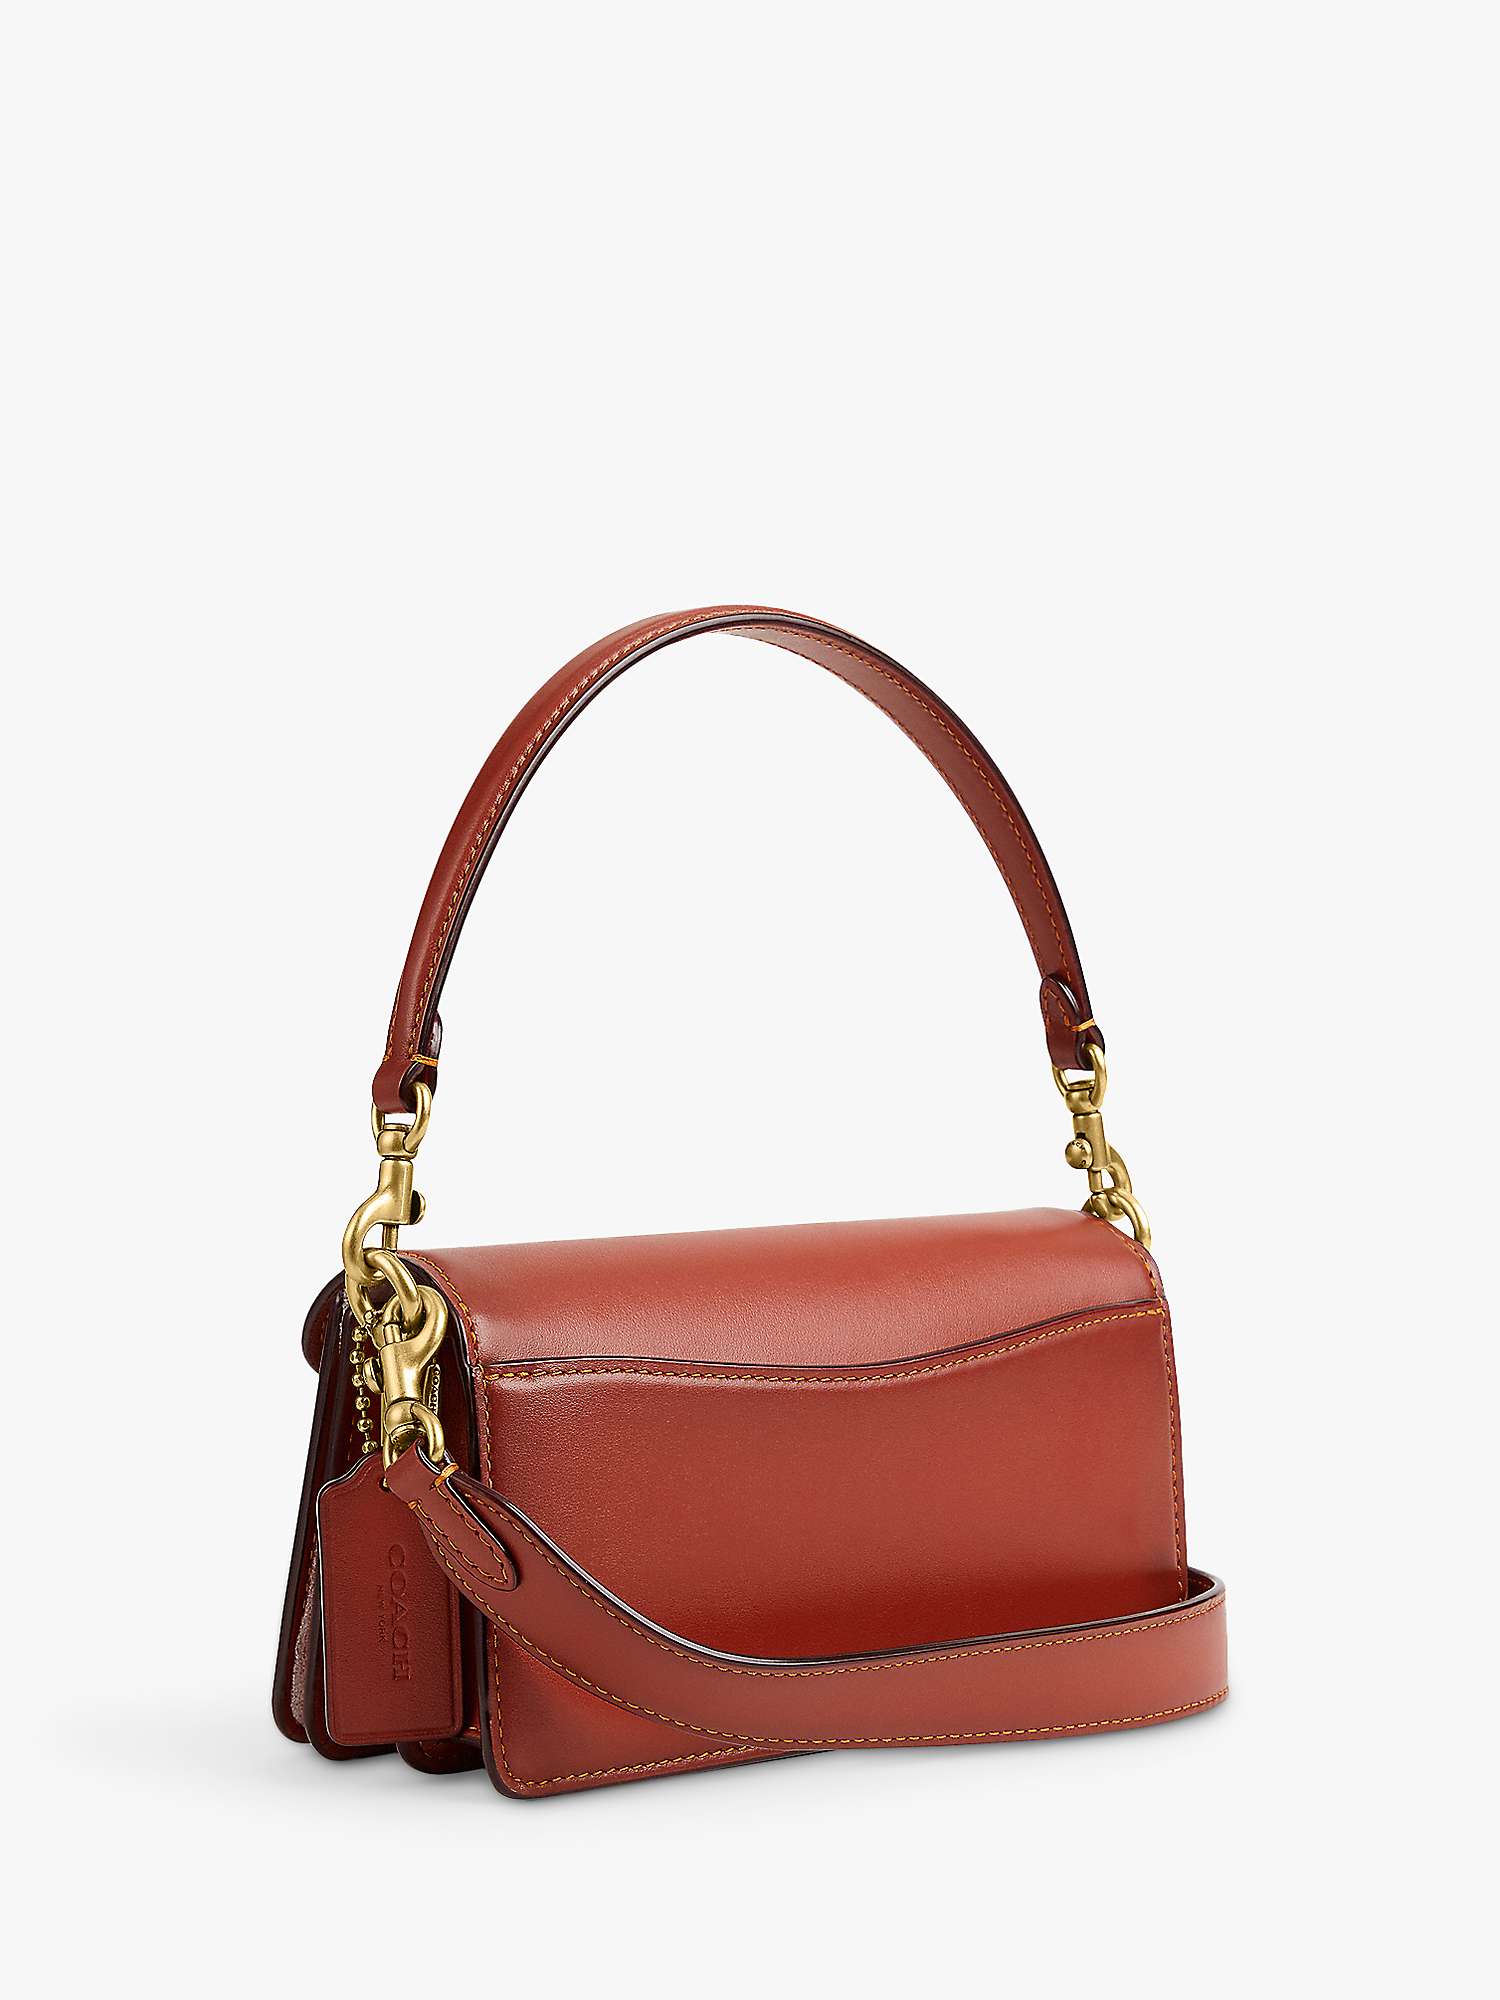 Buy Coach Signature Tabby Leather Shoulder Bag, Tan/Rust Online at johnlewis.com